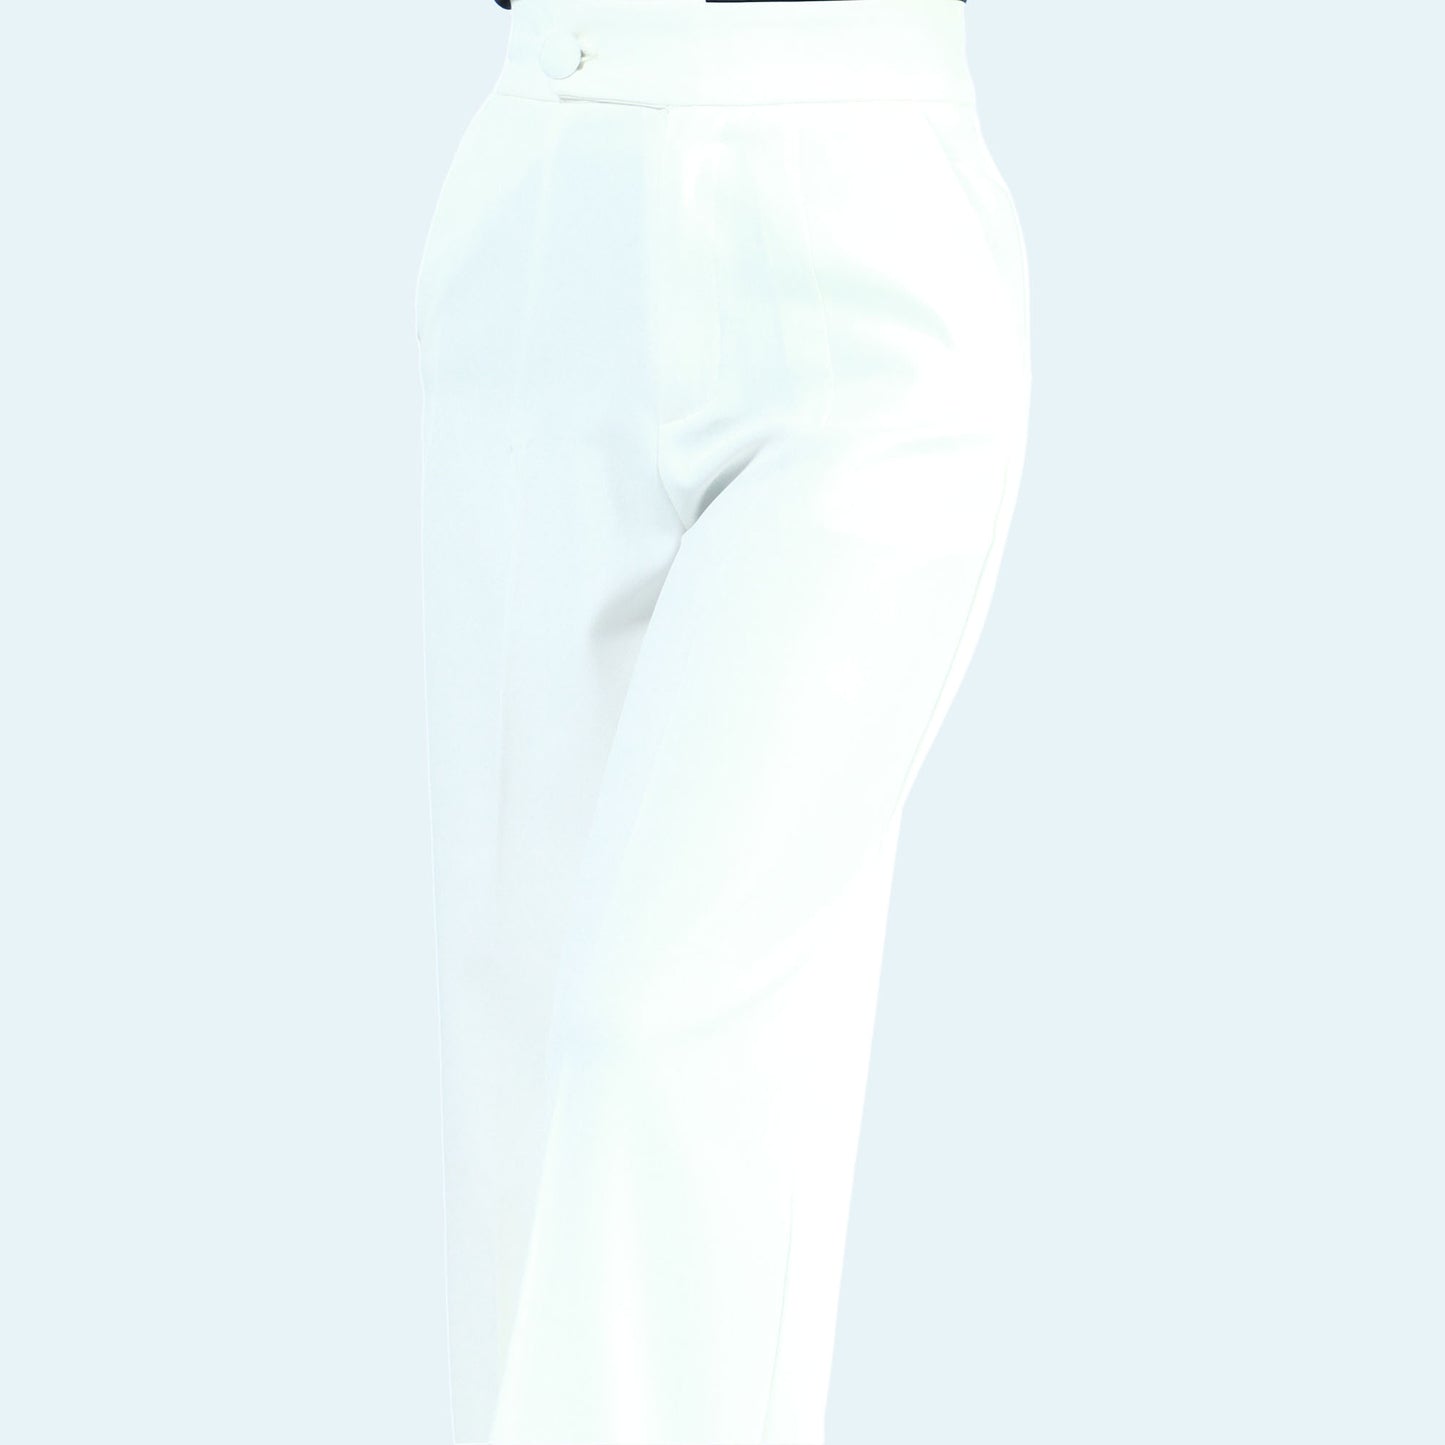 High-Rise Straight Formal Pant